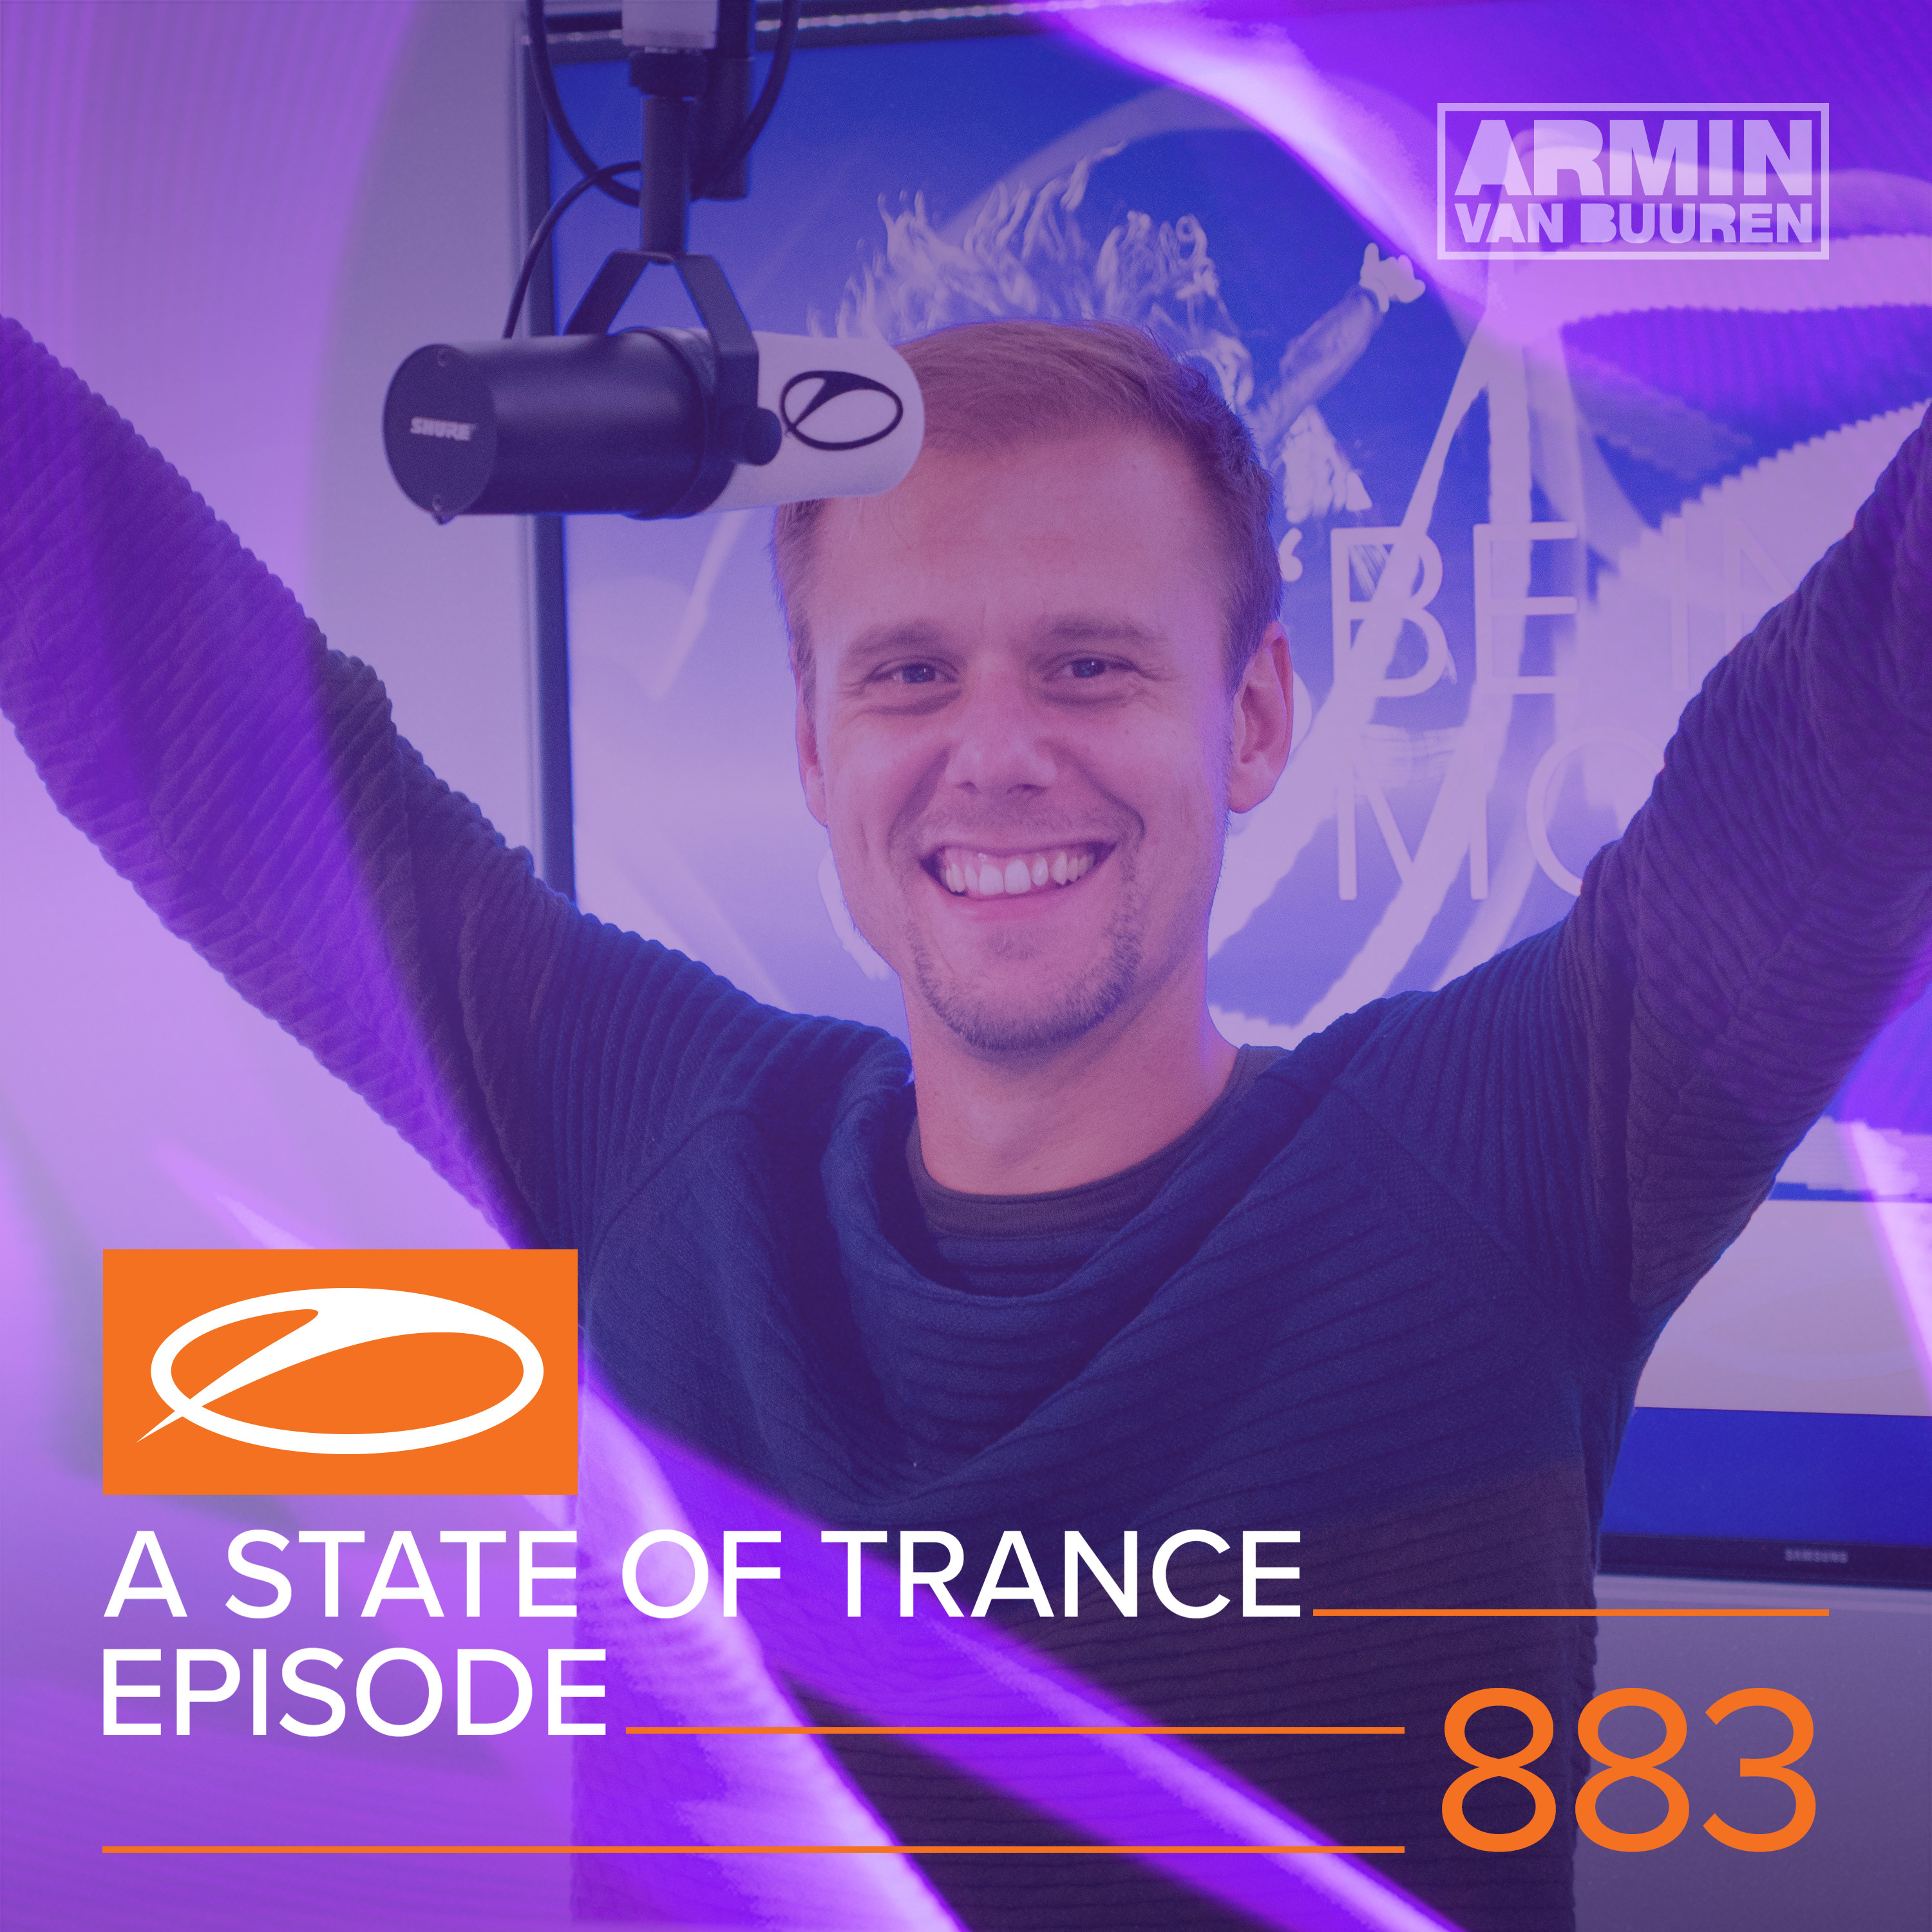 A State Of Trance (ASOT 883) (Coming Up, Pt. 3)